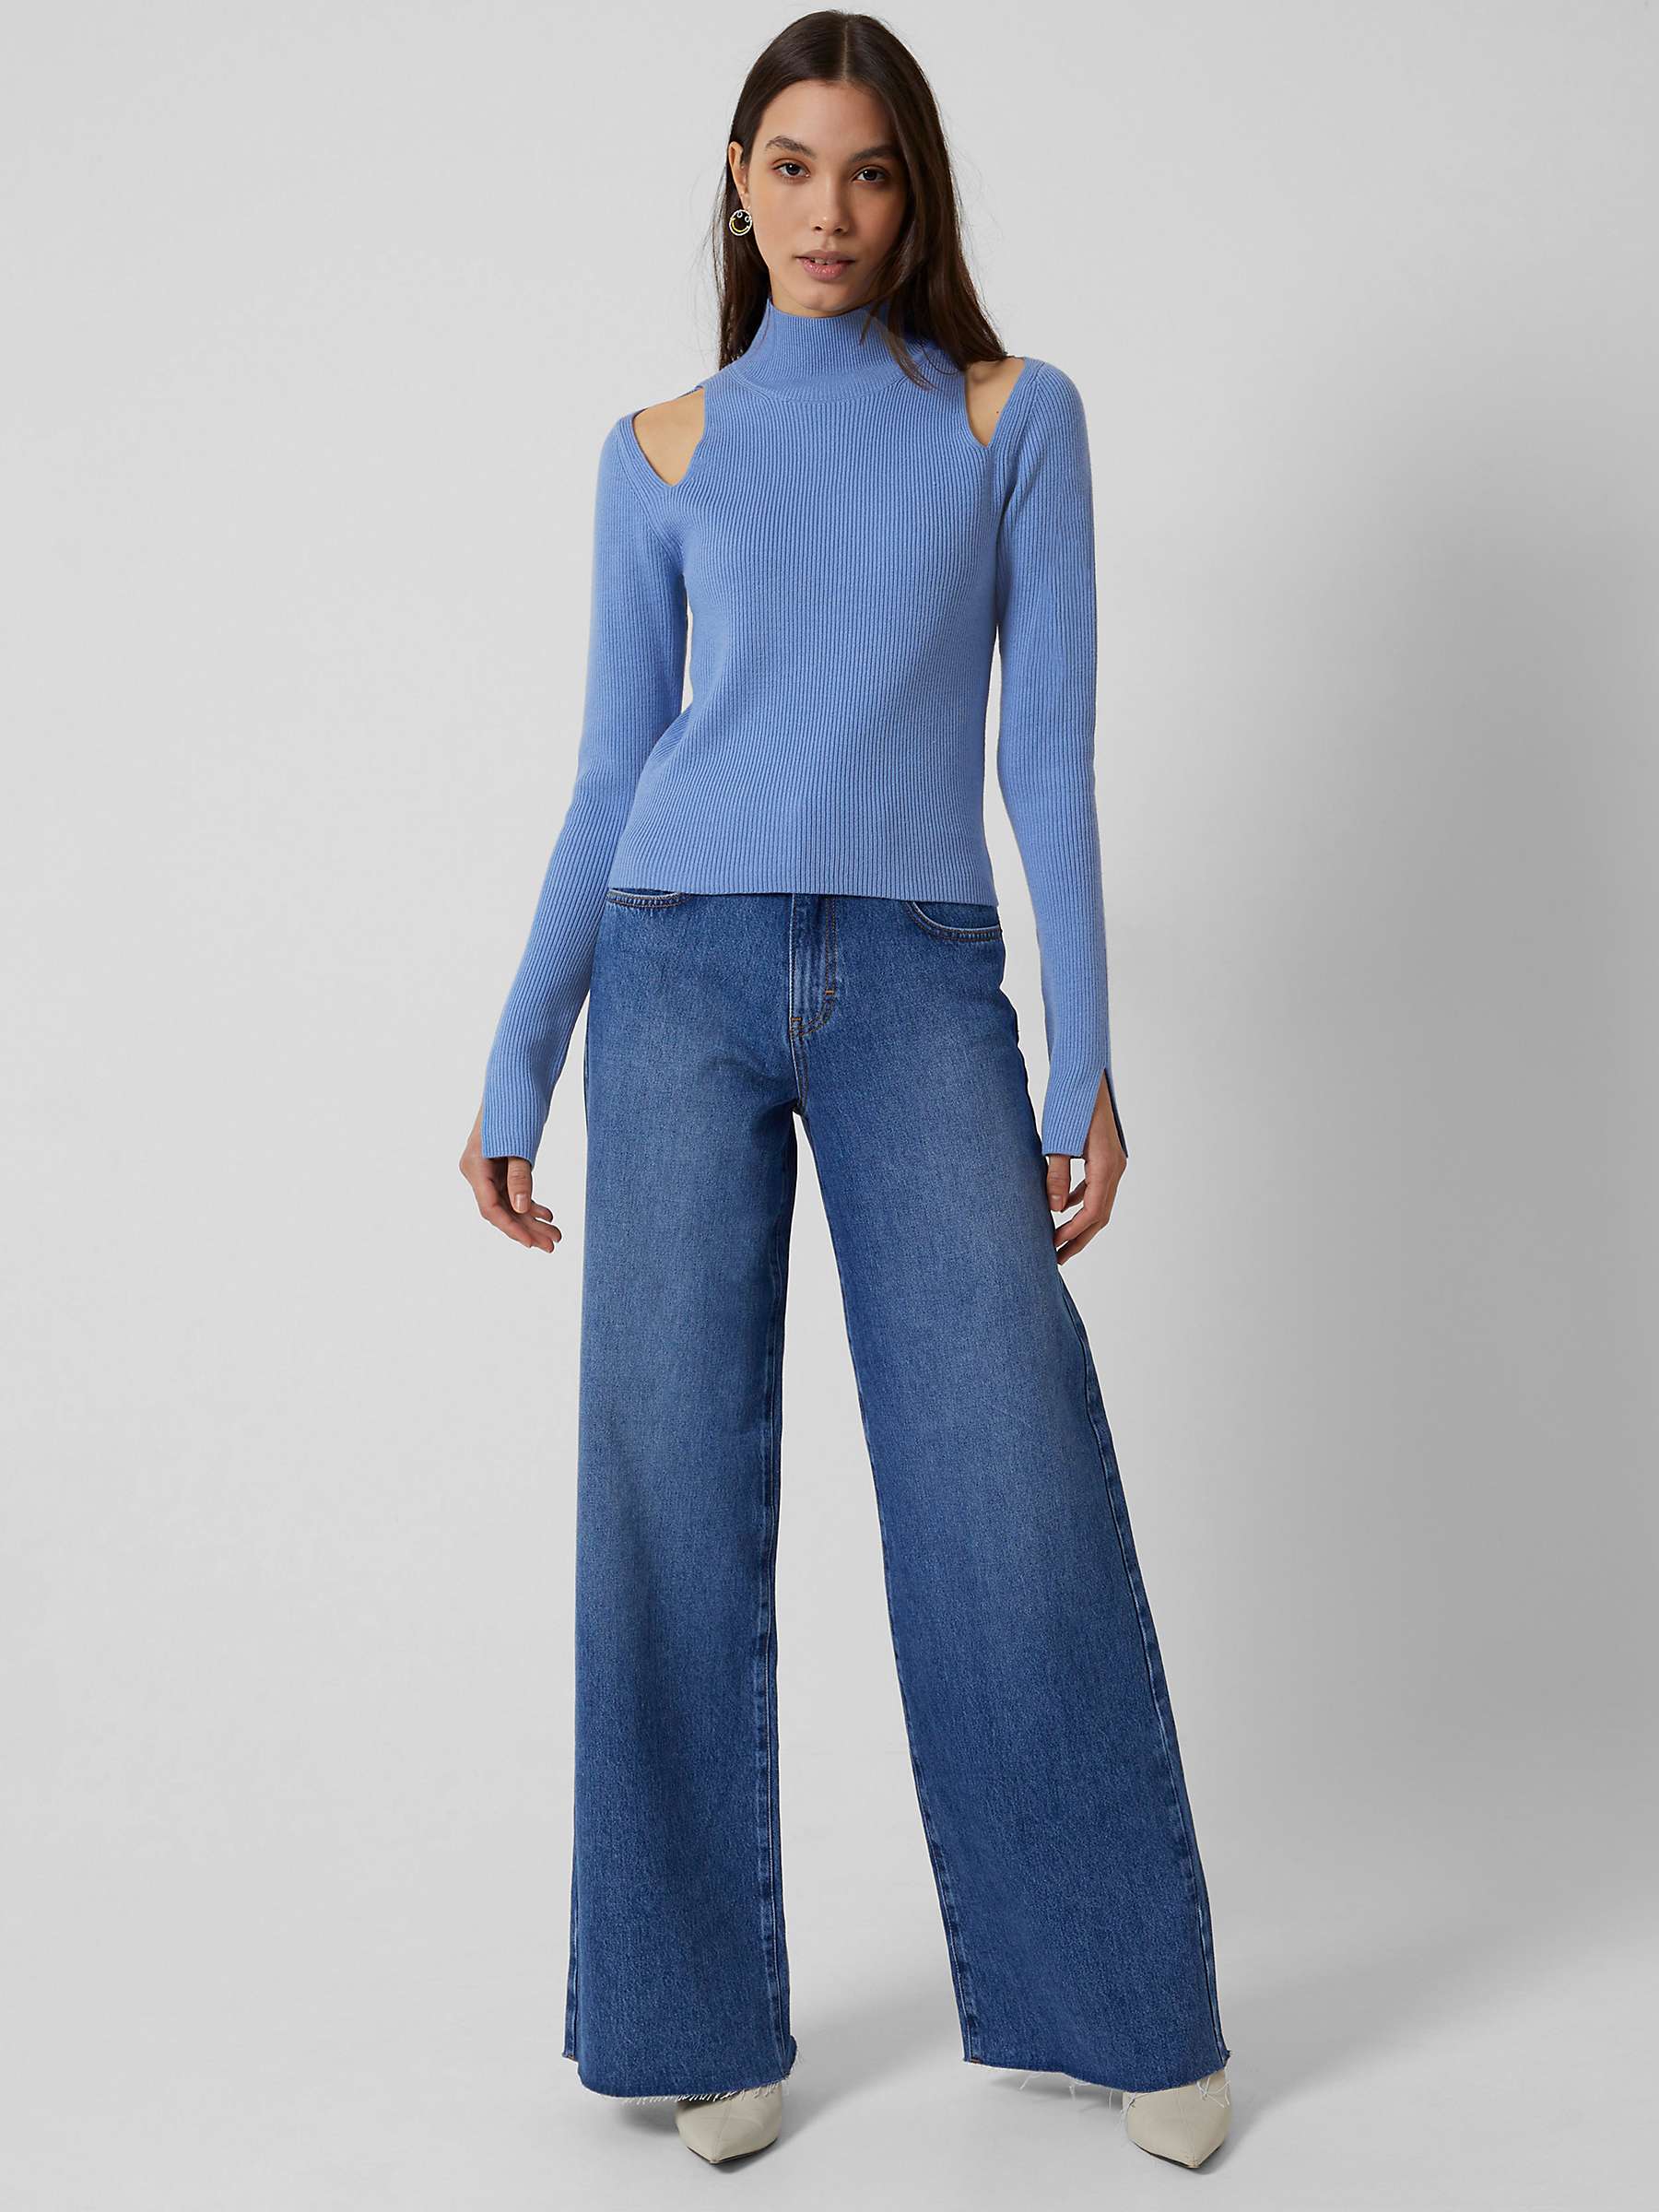 Buy French Connection Lydia Cut Out Shoulder Jumper, Ultramarine Online at johnlewis.com